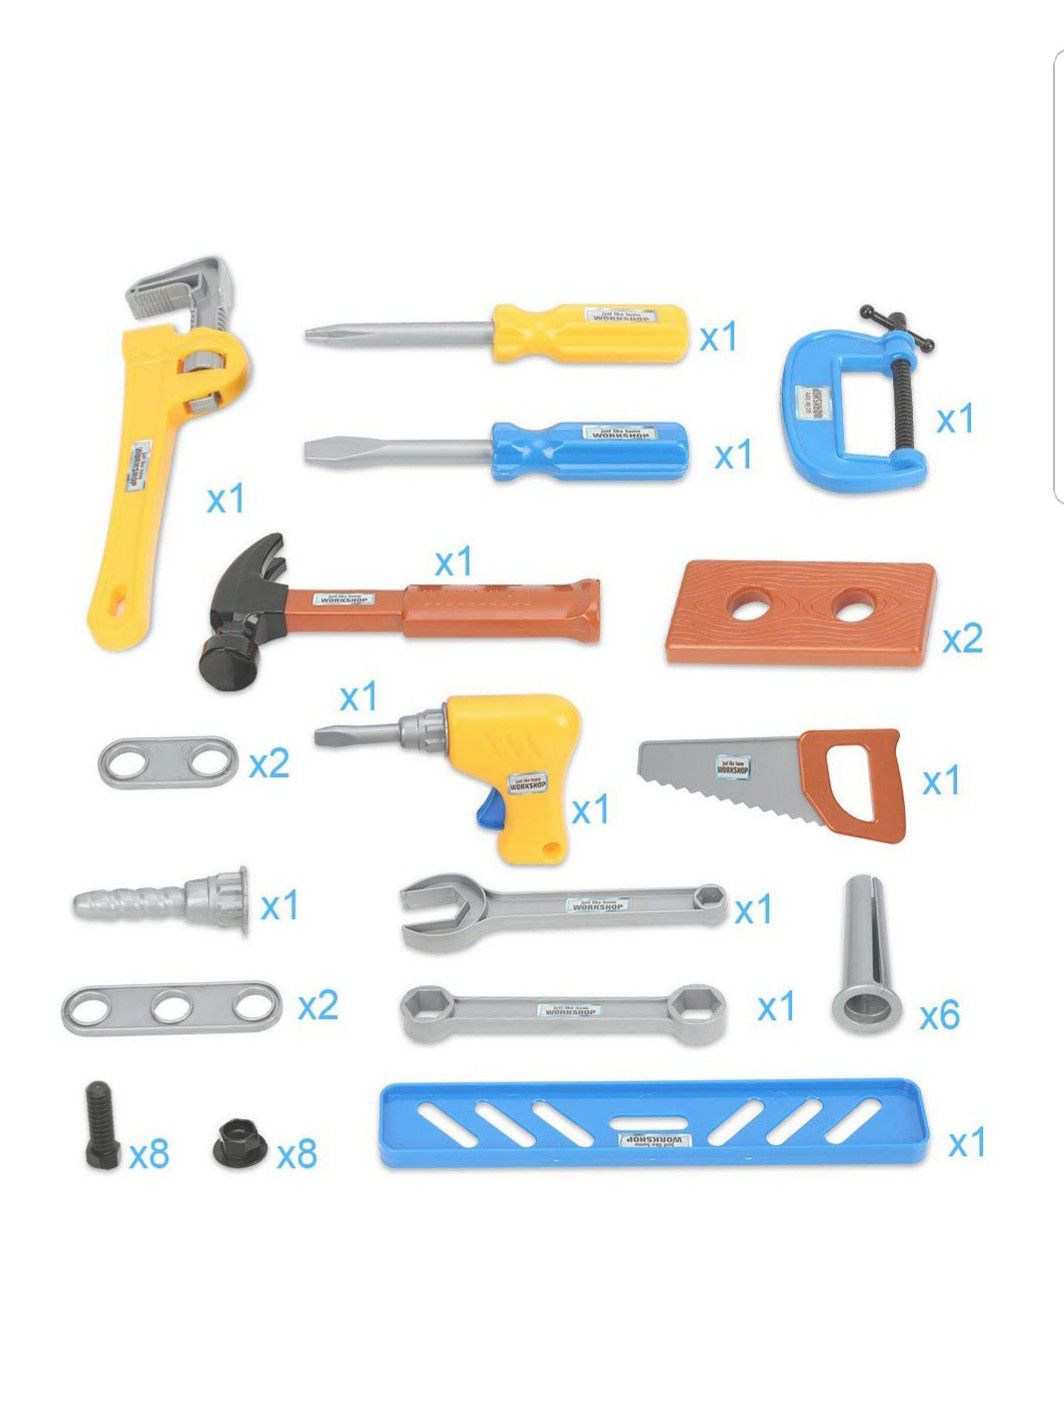 Tools,Boys Construction Play Tools Kit with for Educational Toys Birthday Present for Kids (40PCs)